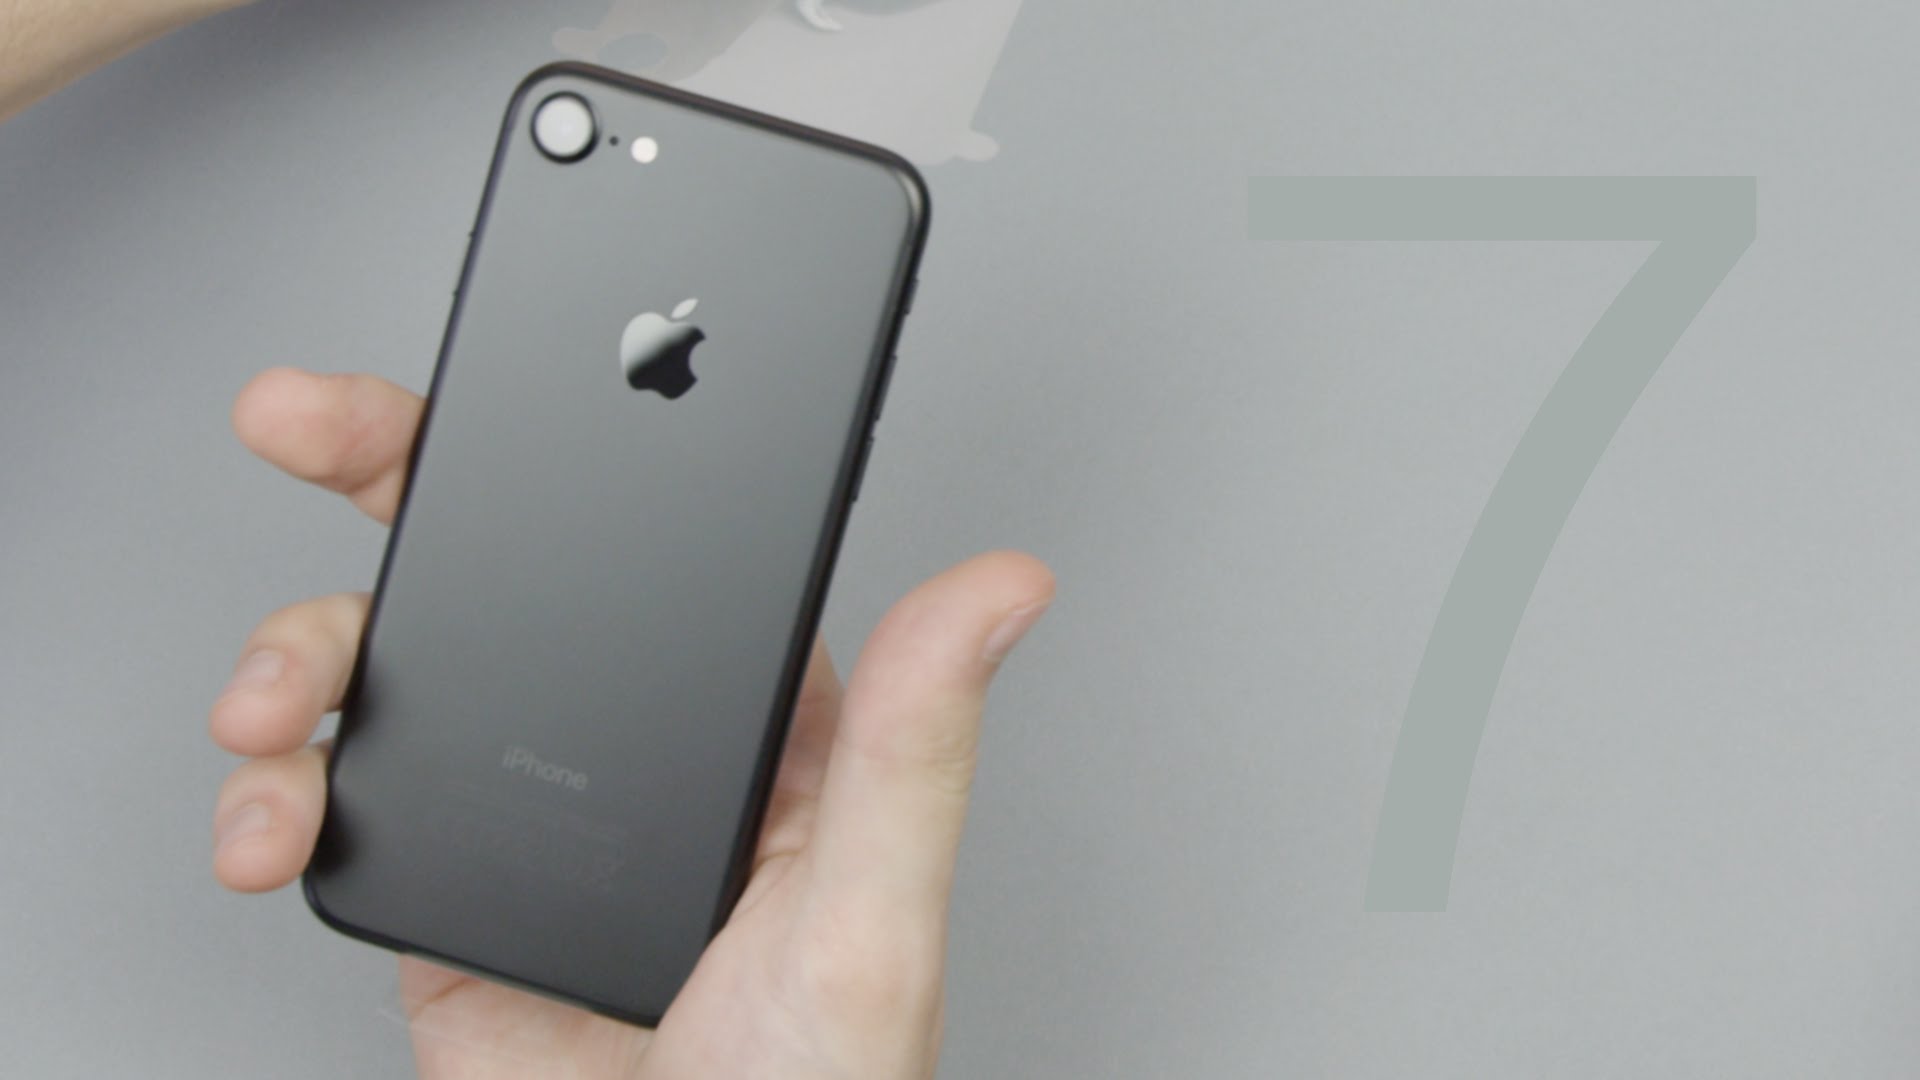 iPhone 7 Unboxing: Matte Black! - YouTube